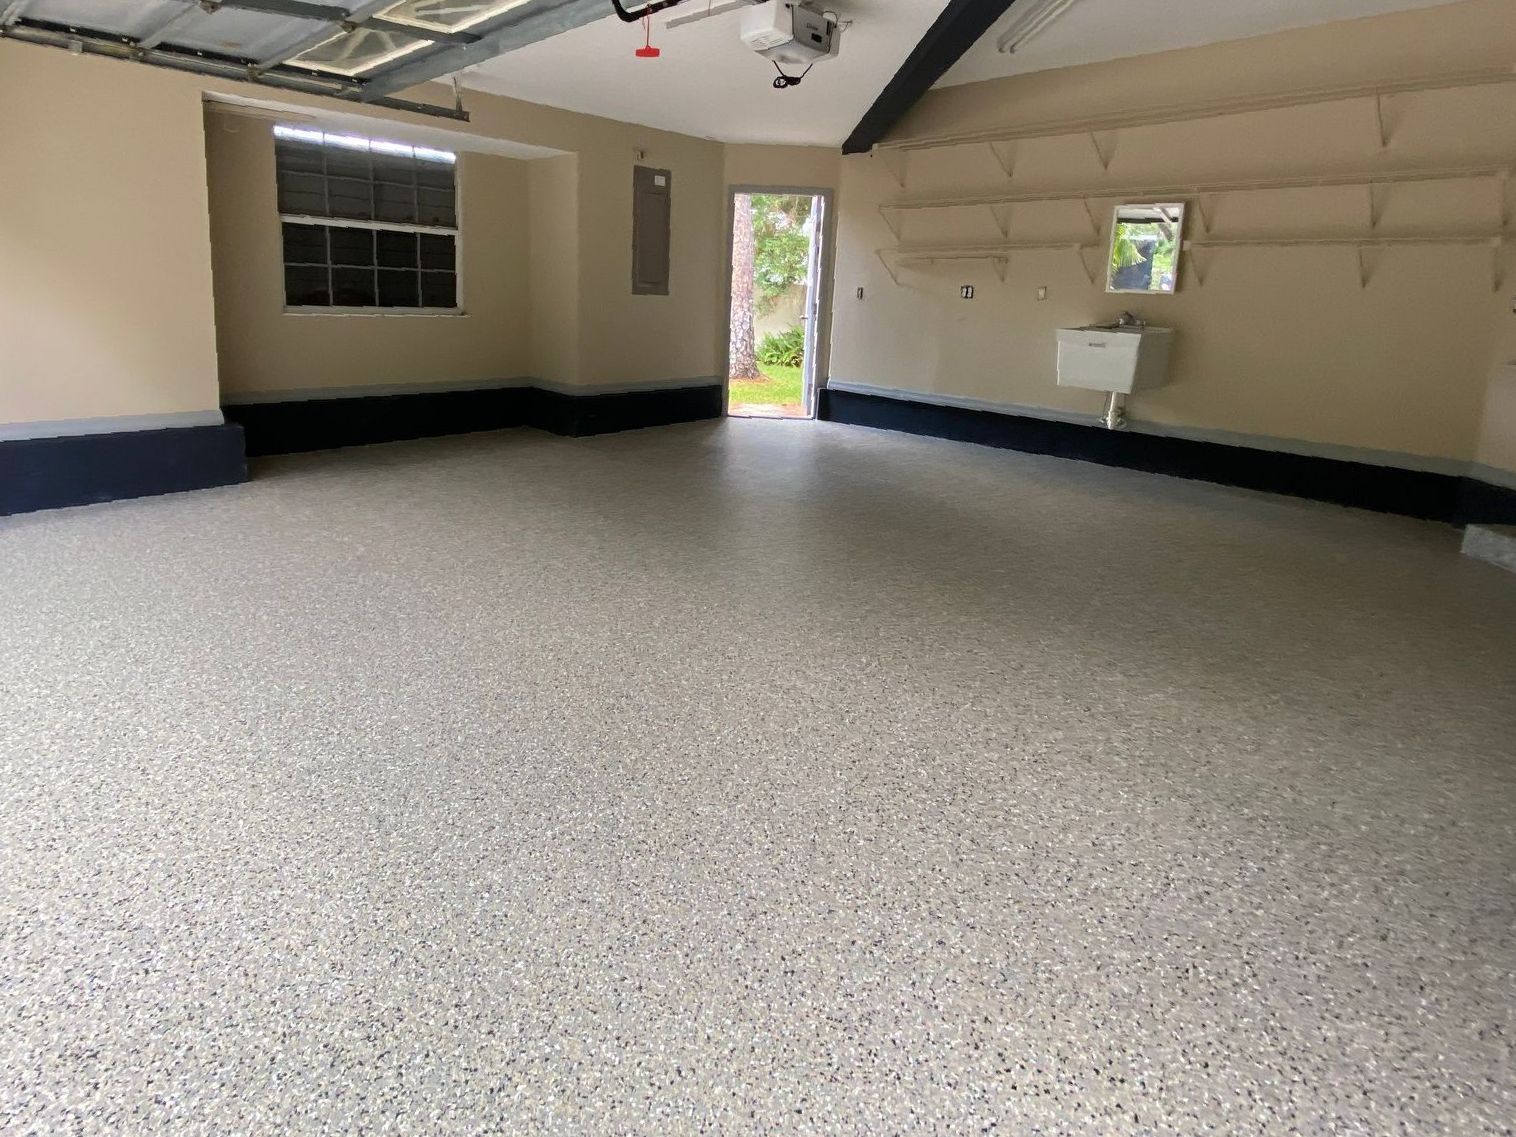 Garage with neutral-toned concrete coating applied to concrete floor